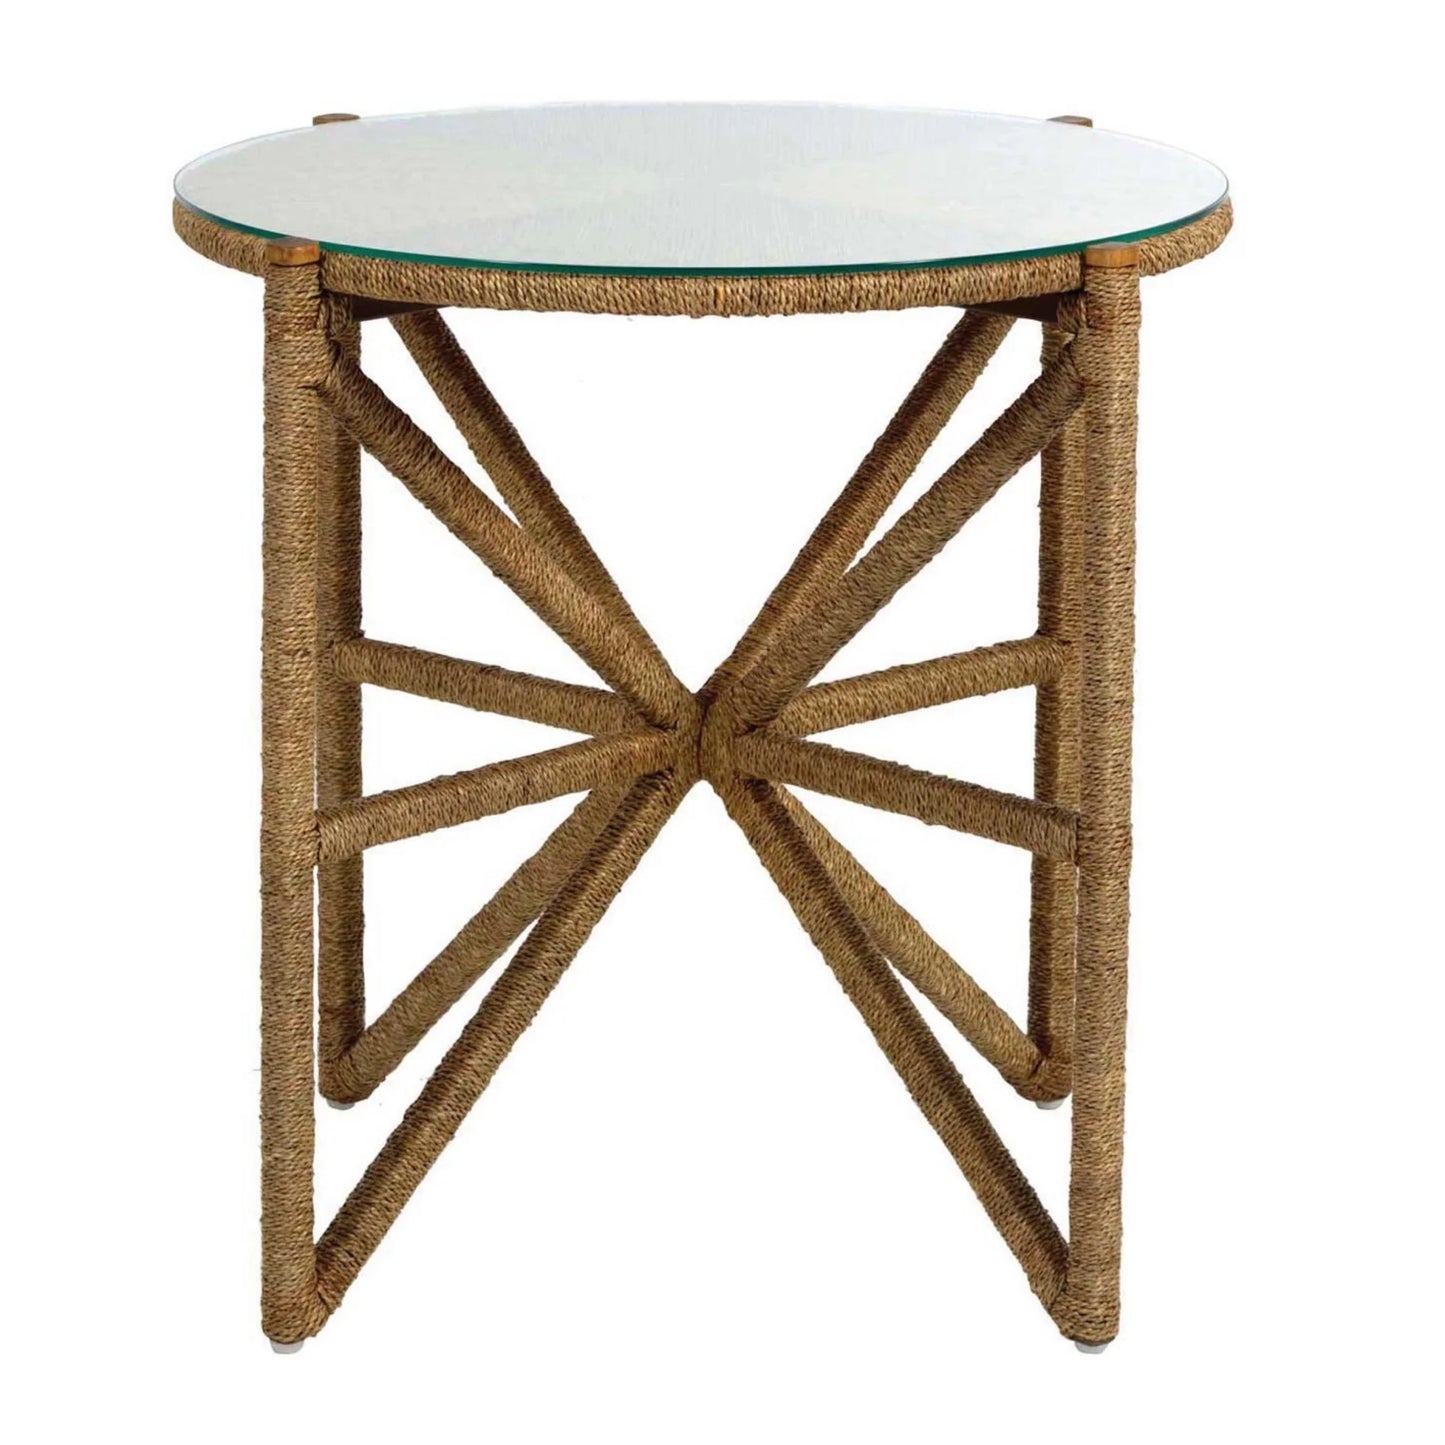 Sea grass side table